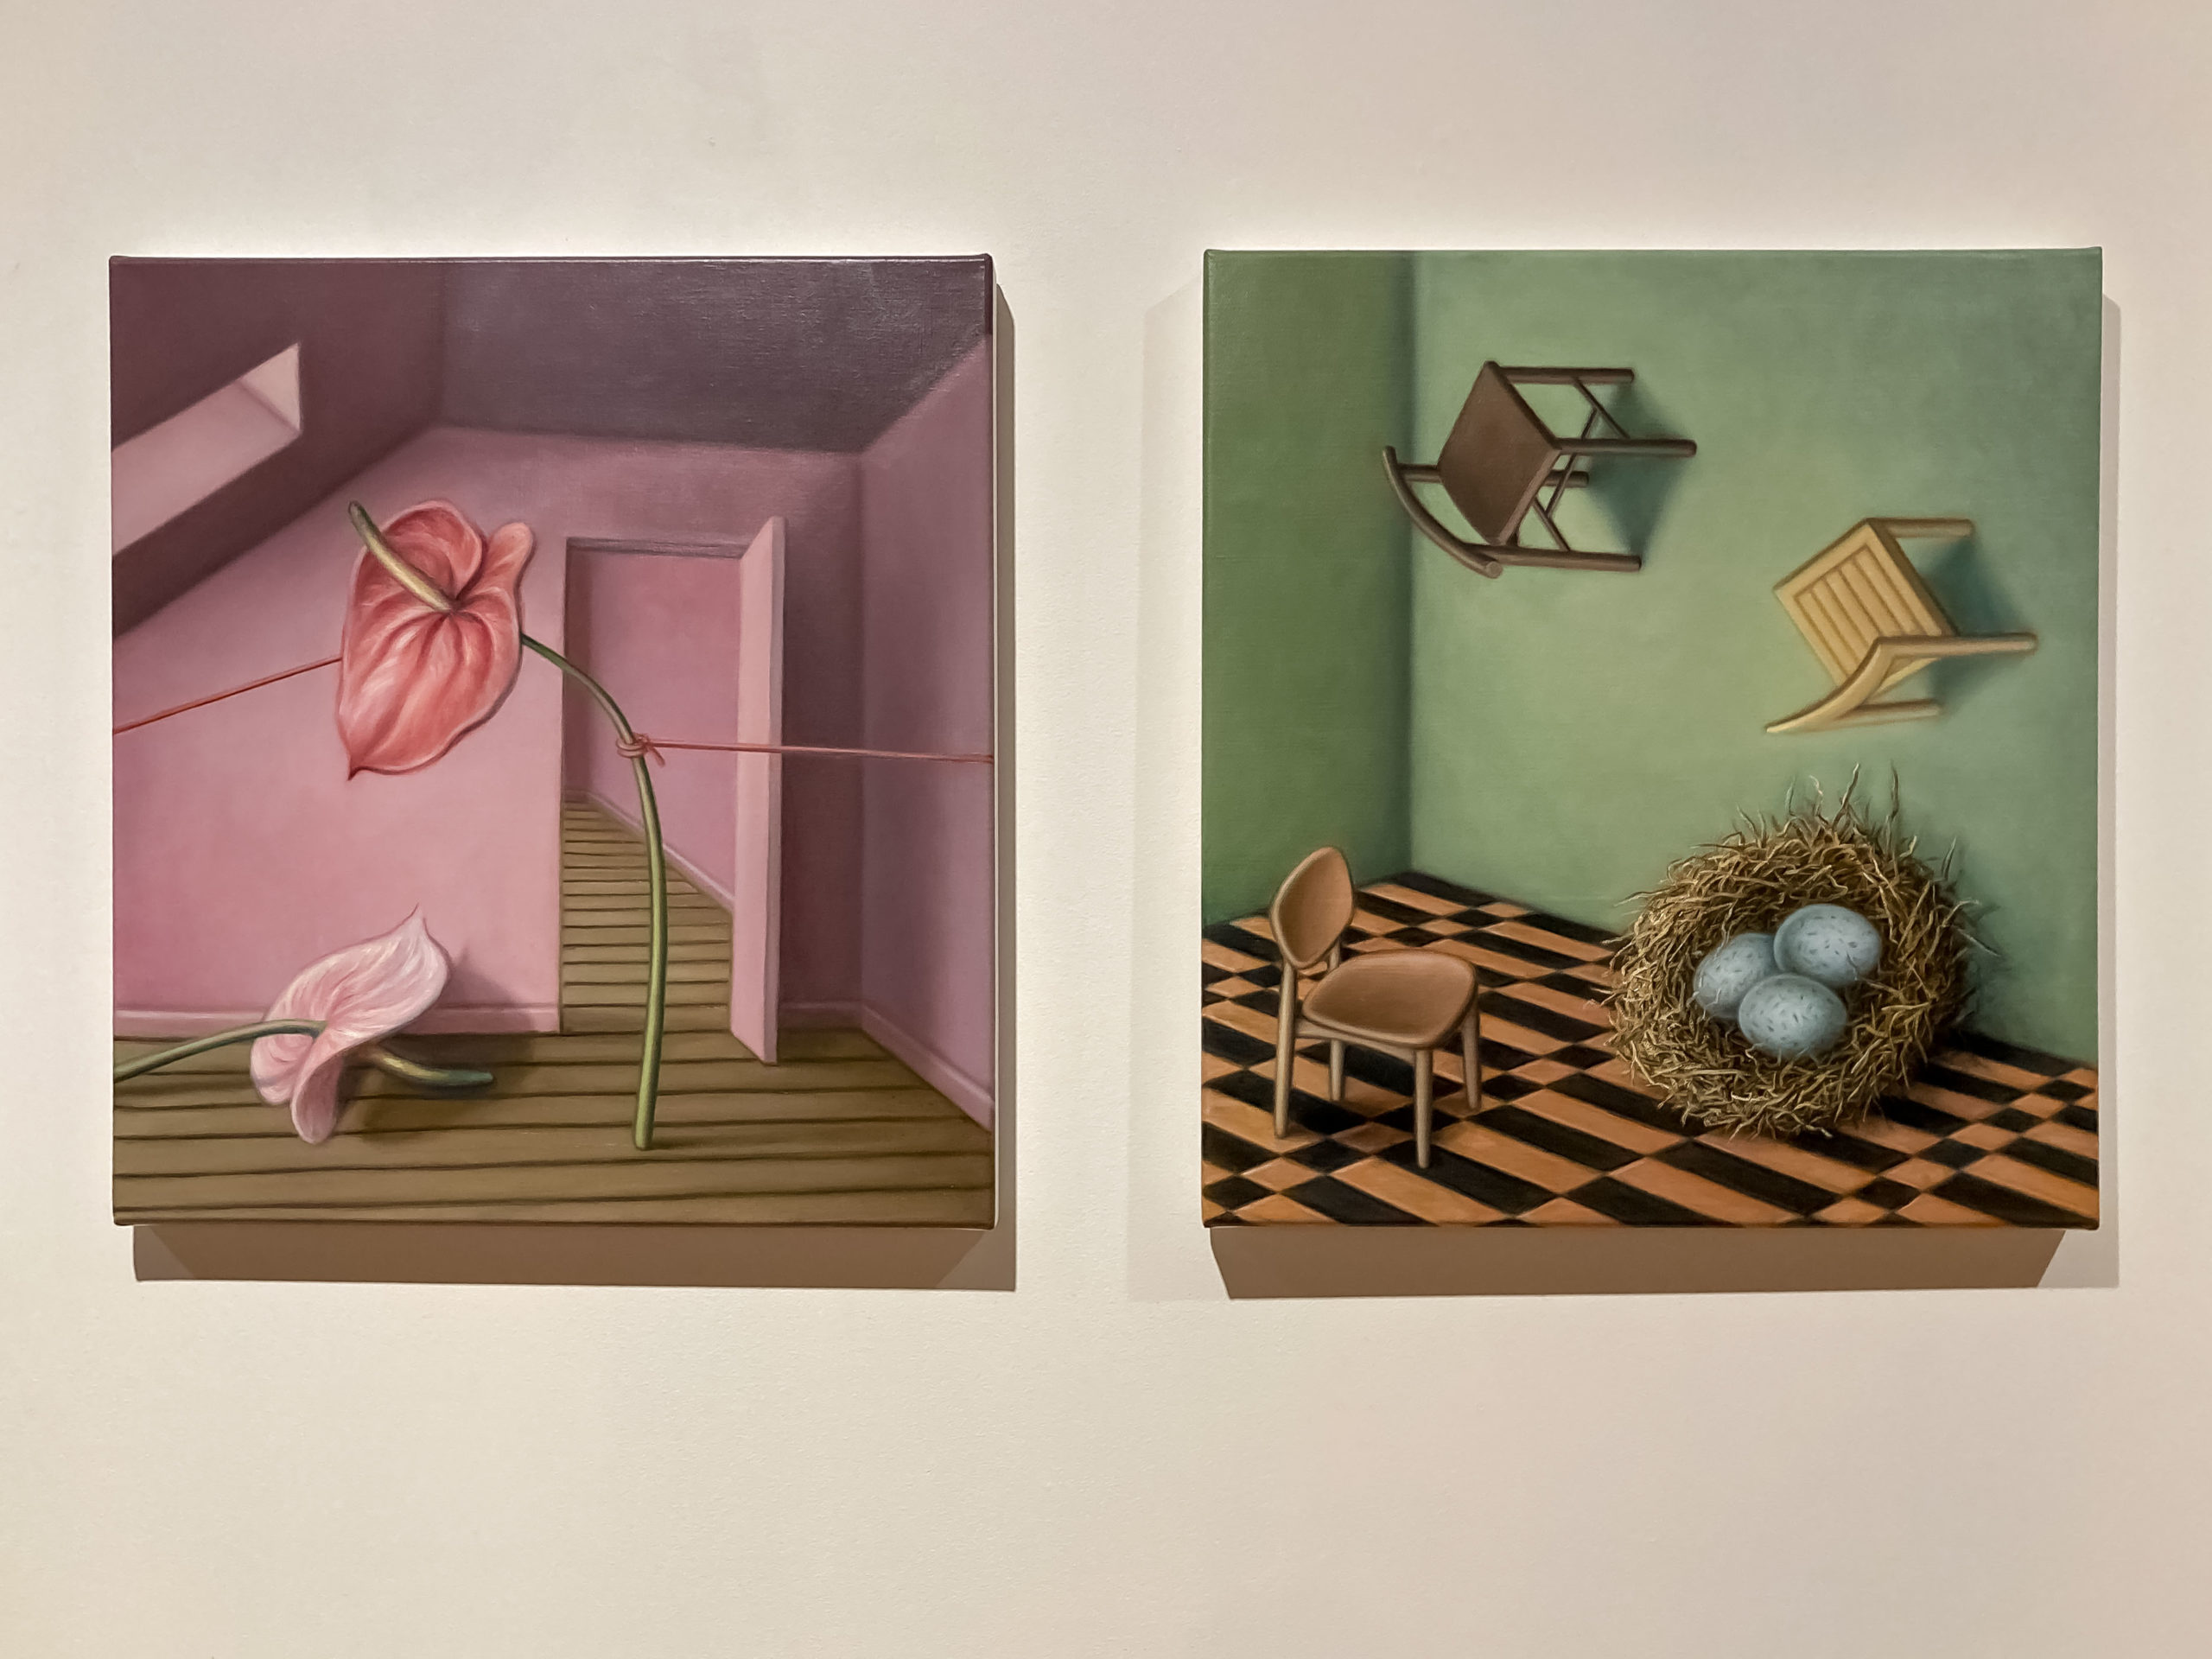 A pink painting of Anthuriums held tightly by red thread, and a gren tonied painting with a nest containing eggs, and three chairs, two of which are on the green wall